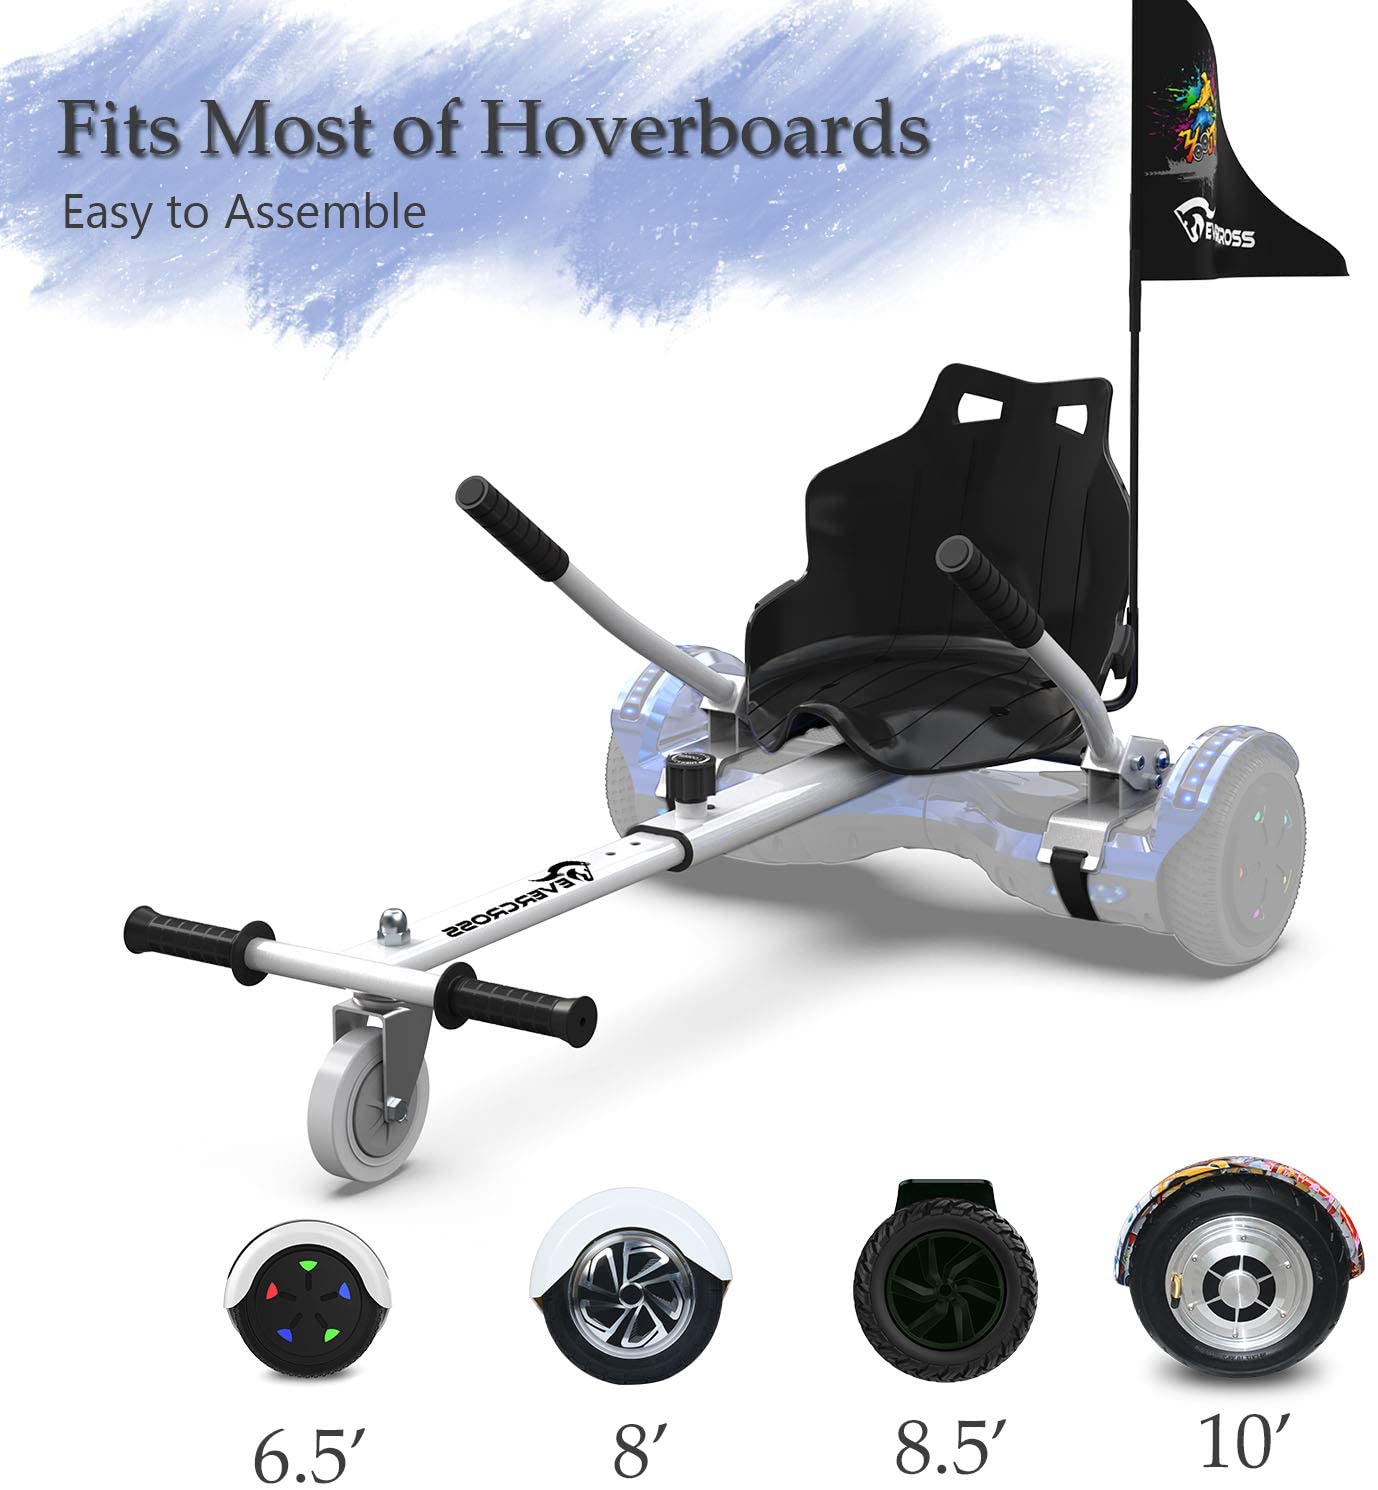 New Gen Hoverboard Accessories with Adjustable Length for 6.5 8 8.5 10 Hoverboard Suitable for Kids & Adults EverCross Hoverboard Seat Attachment Hoverboard Attachments 